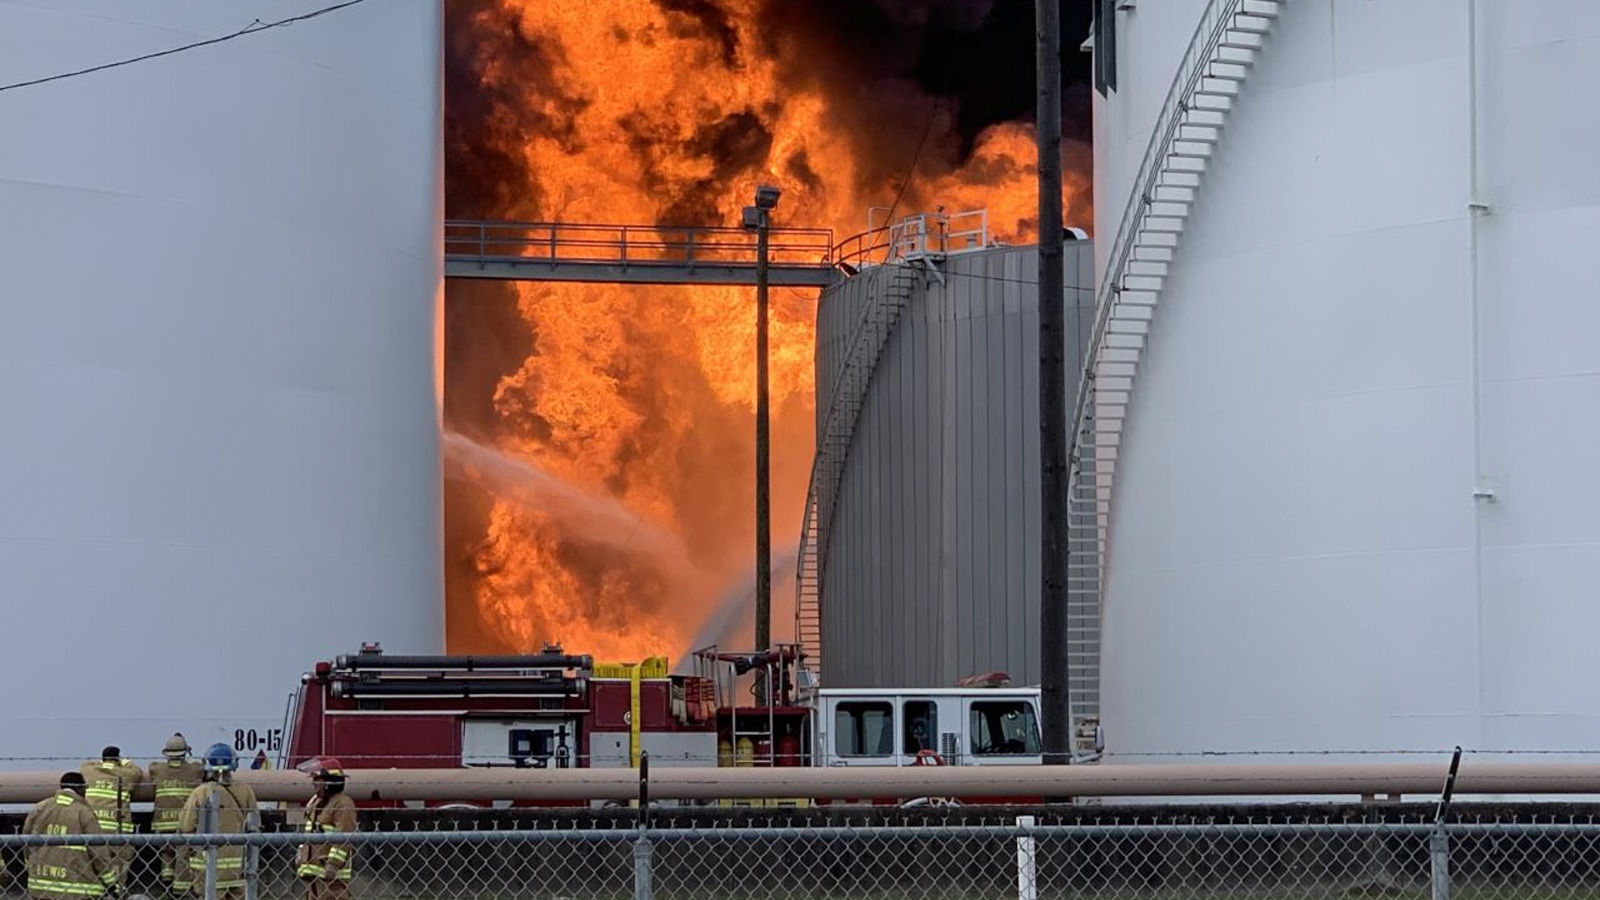 a large fire blazes between two large cylinders